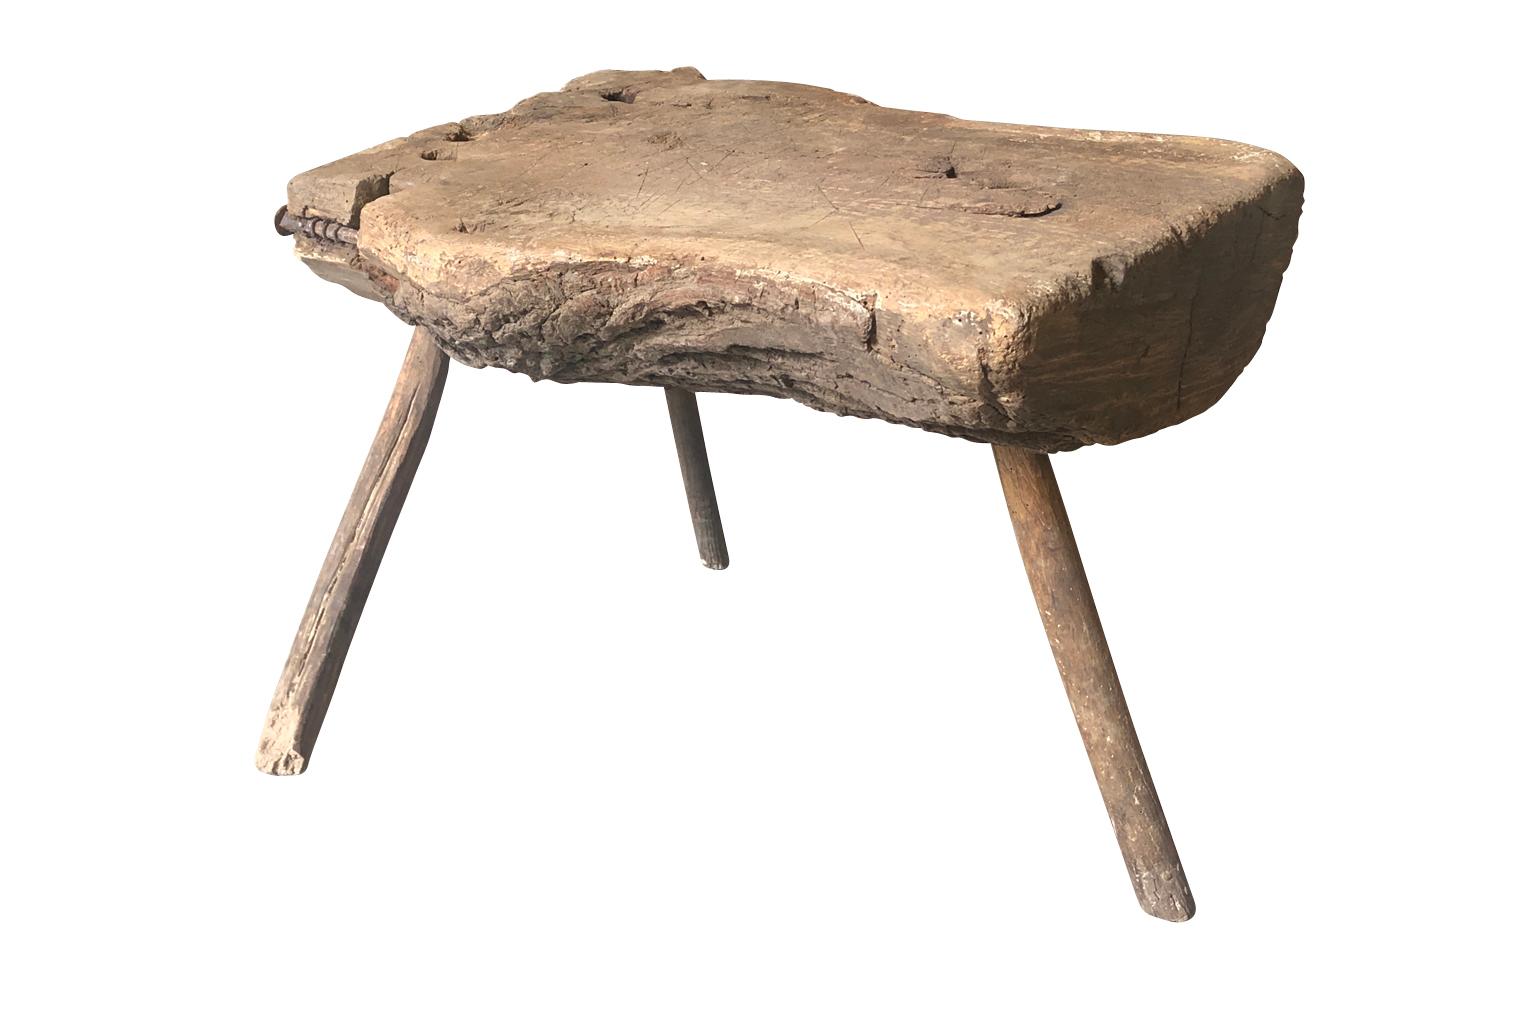 A delightful and primitive 18th century Arte Populaire, Folk Art stool, side table from the South of France. A terrific accent piece for any rustic surrounding.